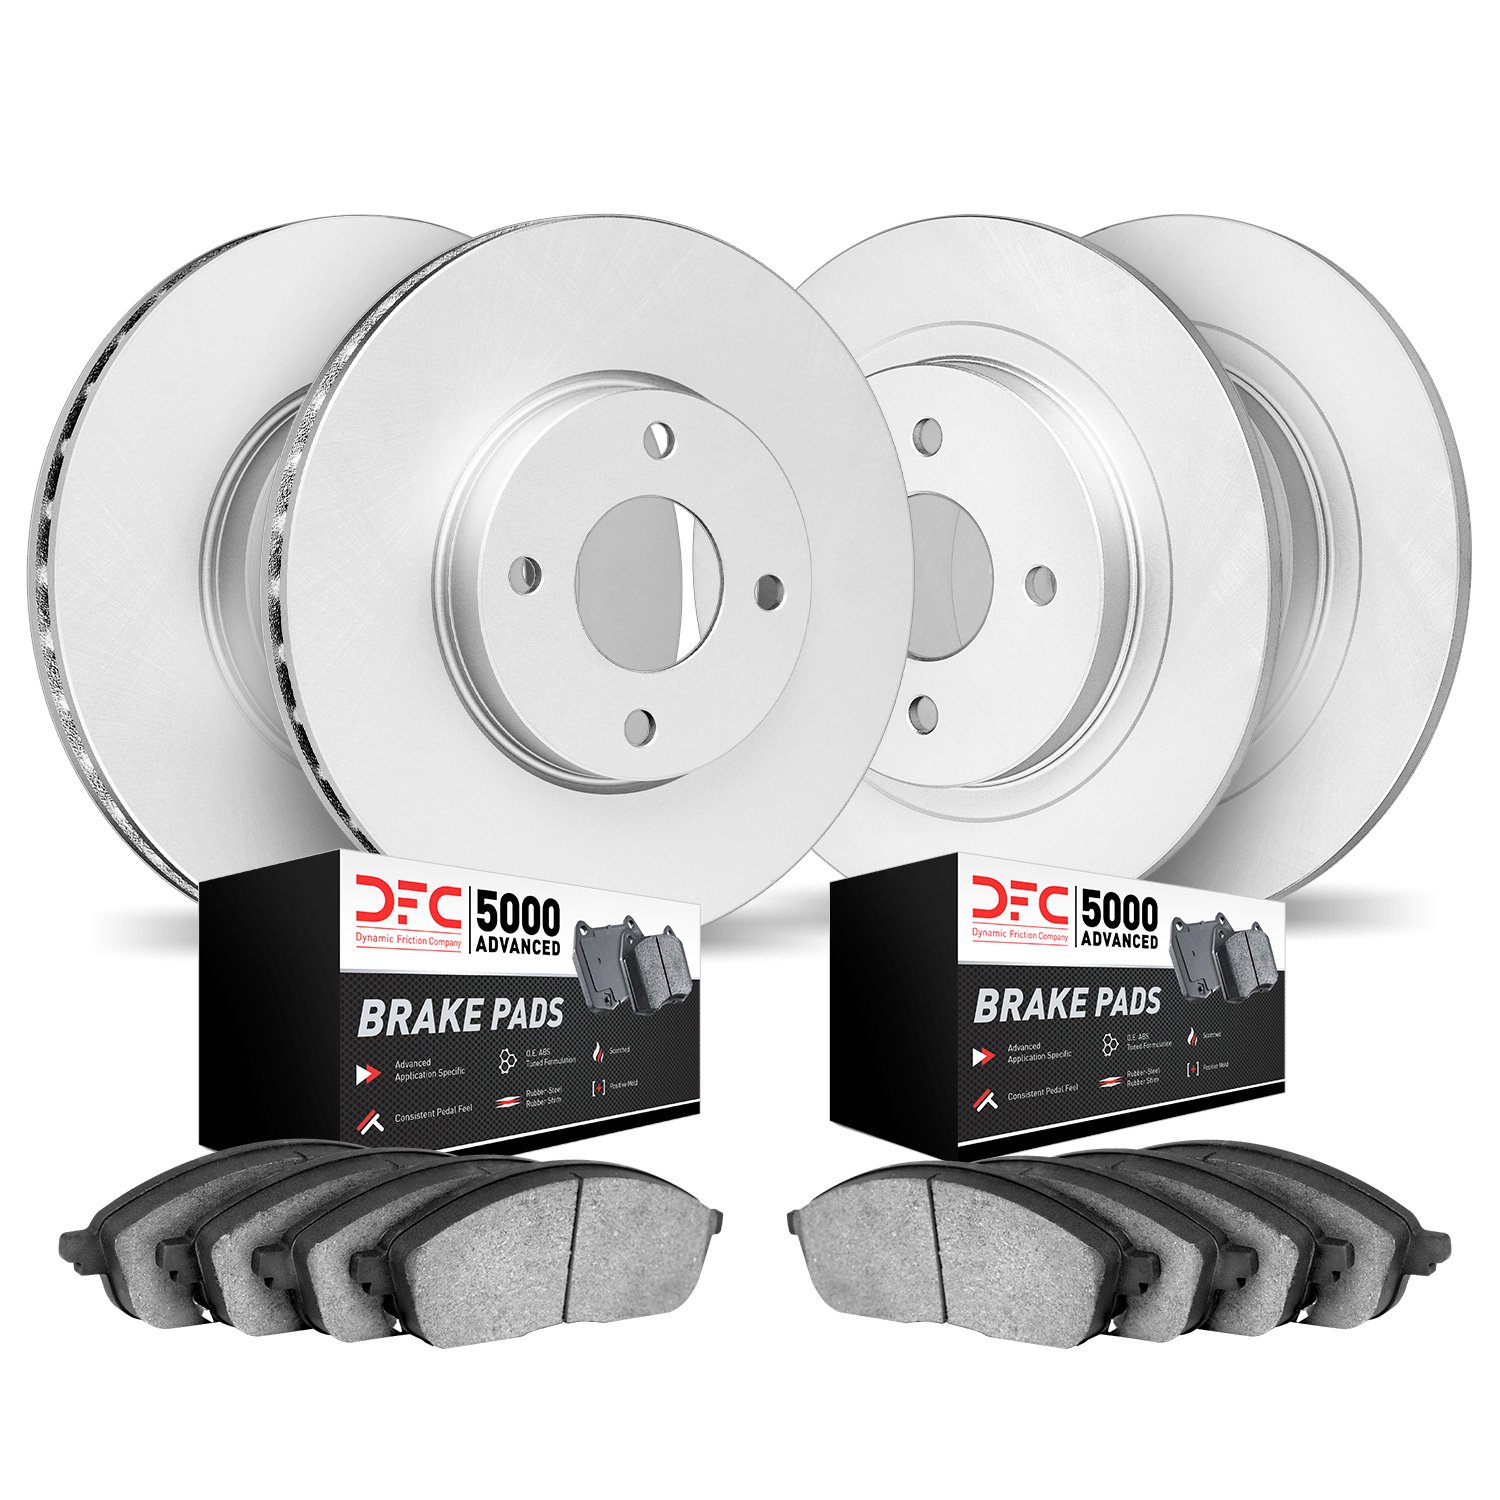 4504-54222 Geospec Brake Rotors w/5000 Advanced Brake Pads Kit, 2002-2004 Ford/Lincoln/Mercury/Mazda, Position: Front and Rear